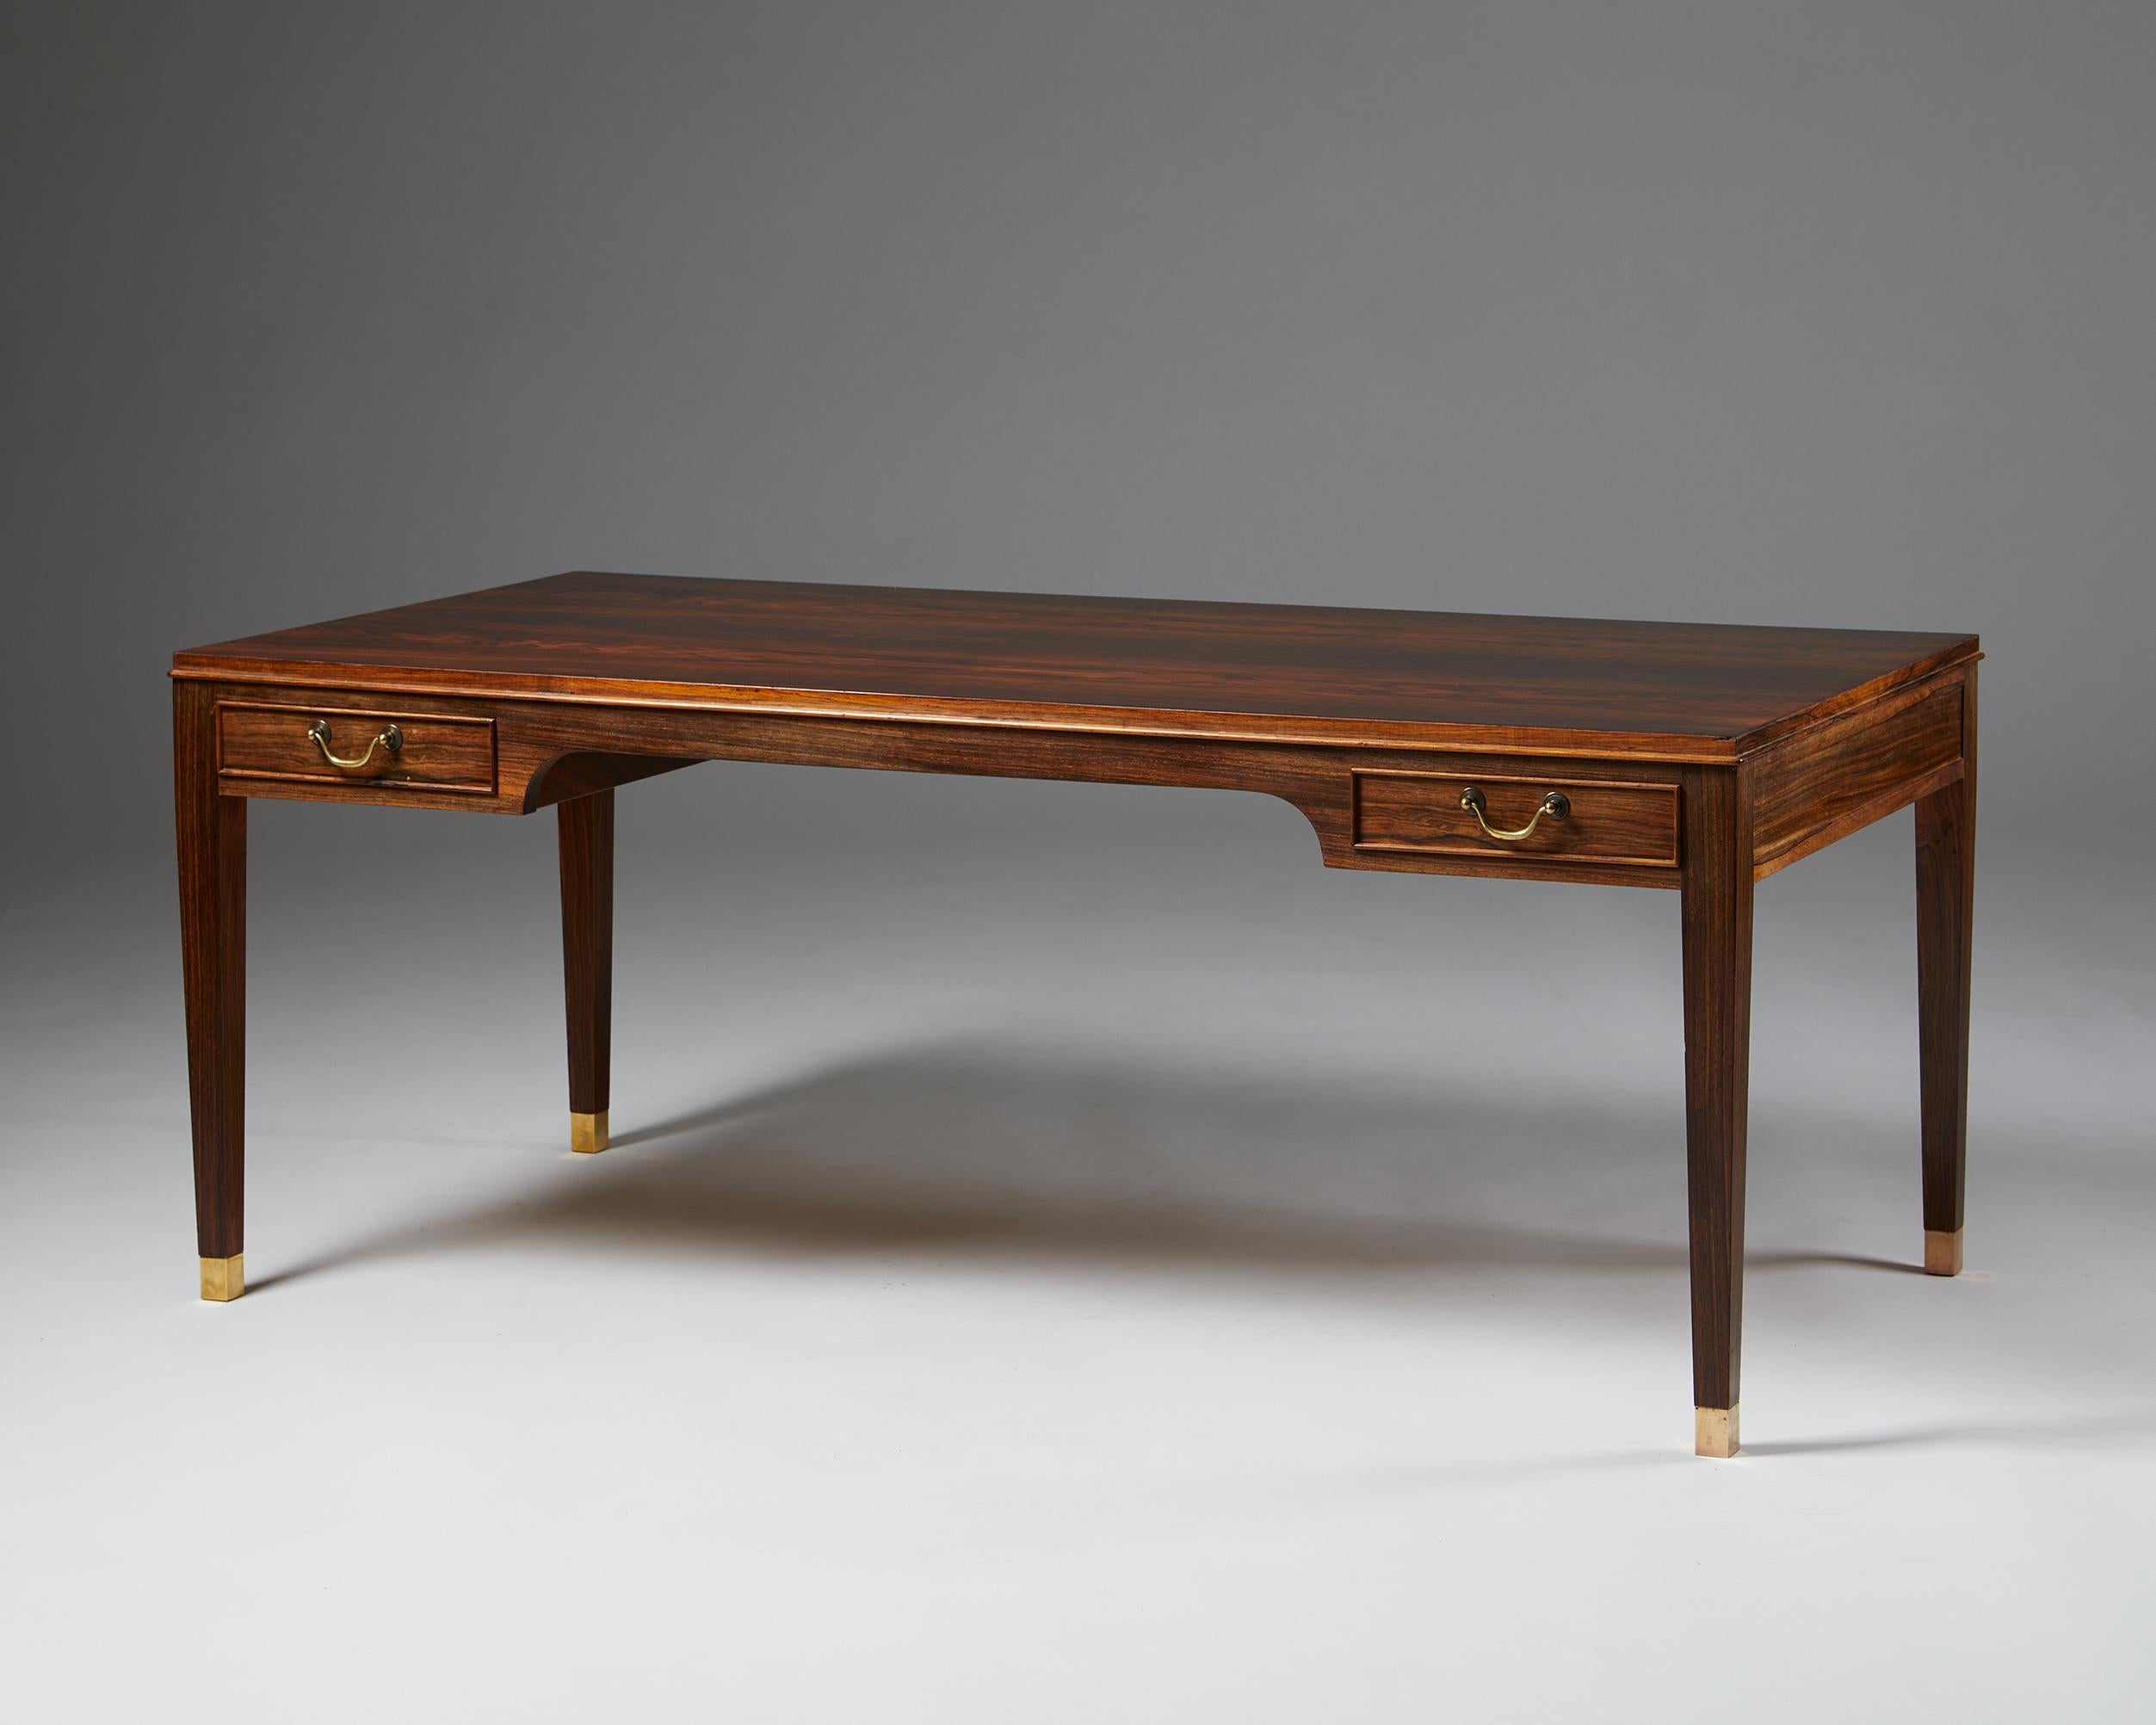 Occasional table designed by Frits Henningsen,
Denmark, 1940’s.

Rosewood with brass handles.

Dimensions:
H: 53 cm / 1’ 9 3/4”
L: 130 cm / 4’ 3 1/4”
W: 64 cm / 2' 2/3”

Henningsen became a major driver of the furniture exhibitions of the period,